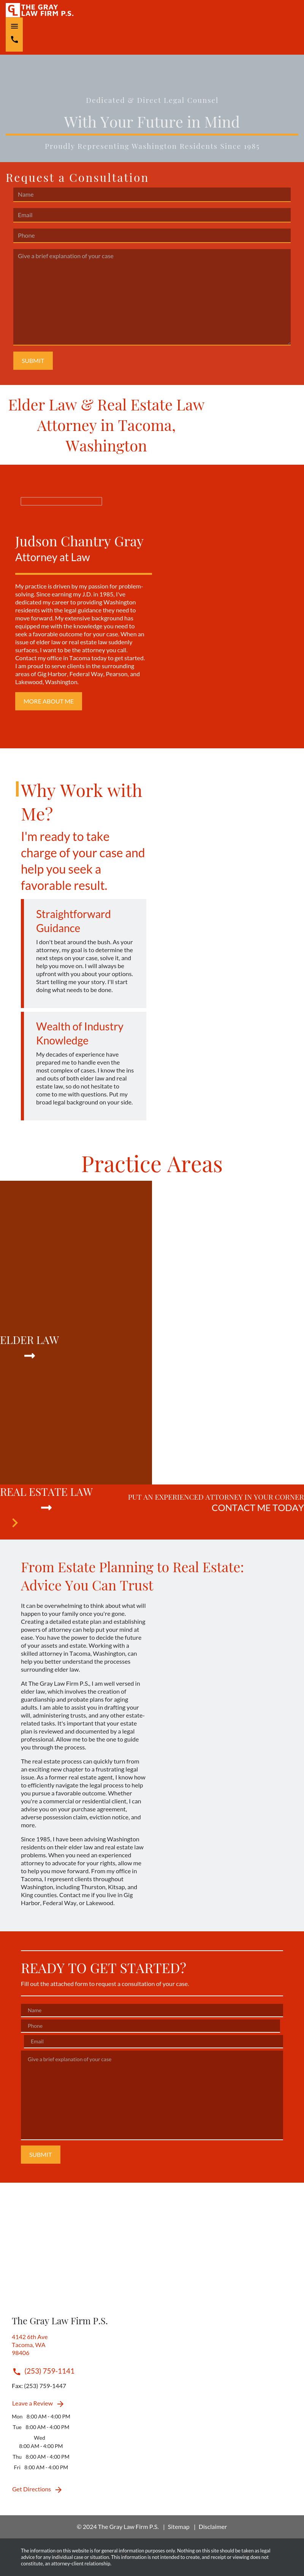 The Gray Law Firm P.S. - Tacoma WA Lawyers